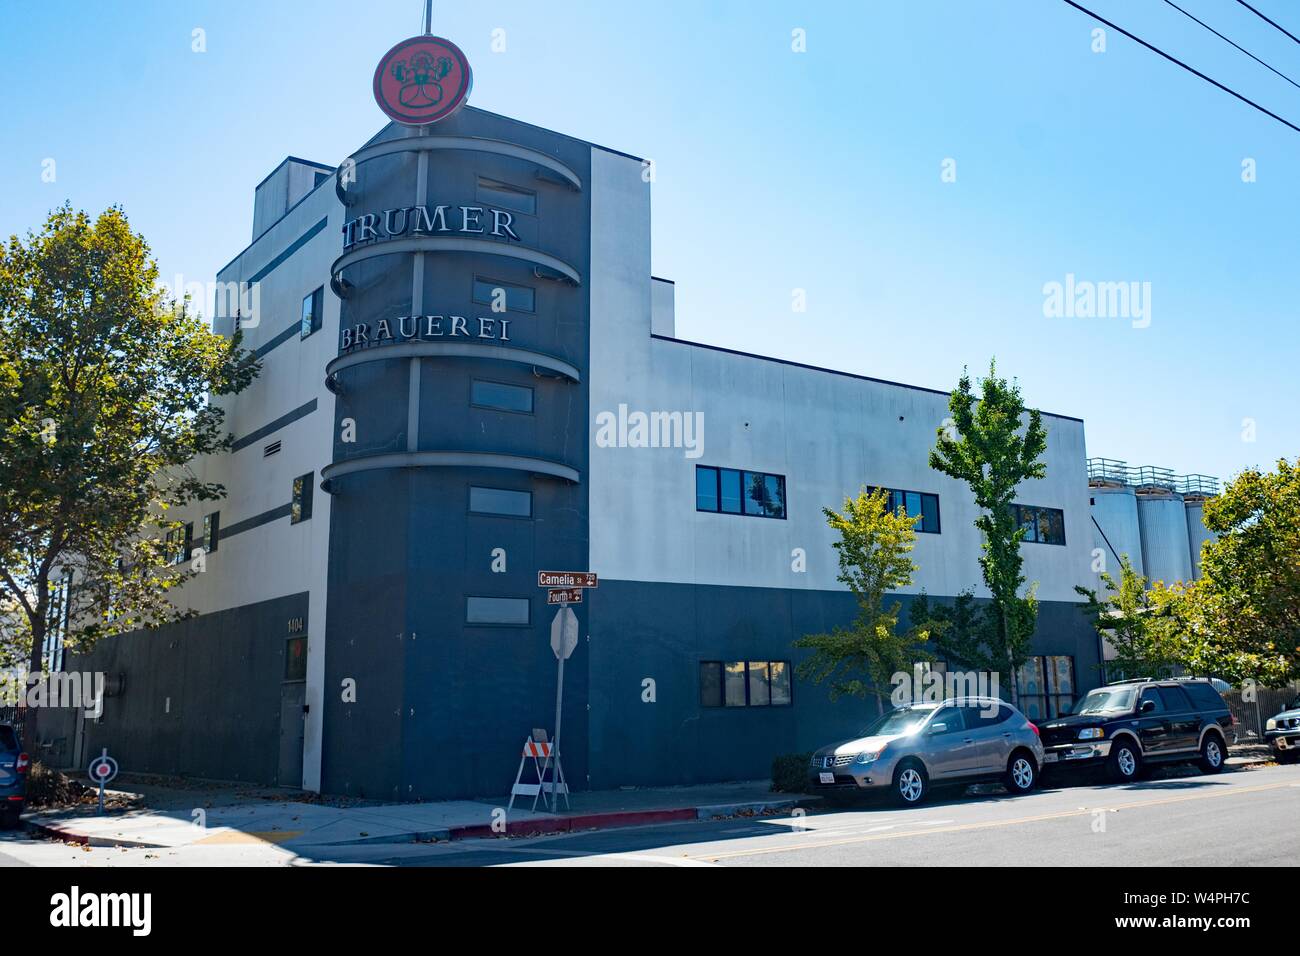 Facade of the Trumber Brauerei beer brewery in Berkeley, California, the United States brewing location for Austrian beer company Trumer Pils, September 13, 2018. () Stock Photo